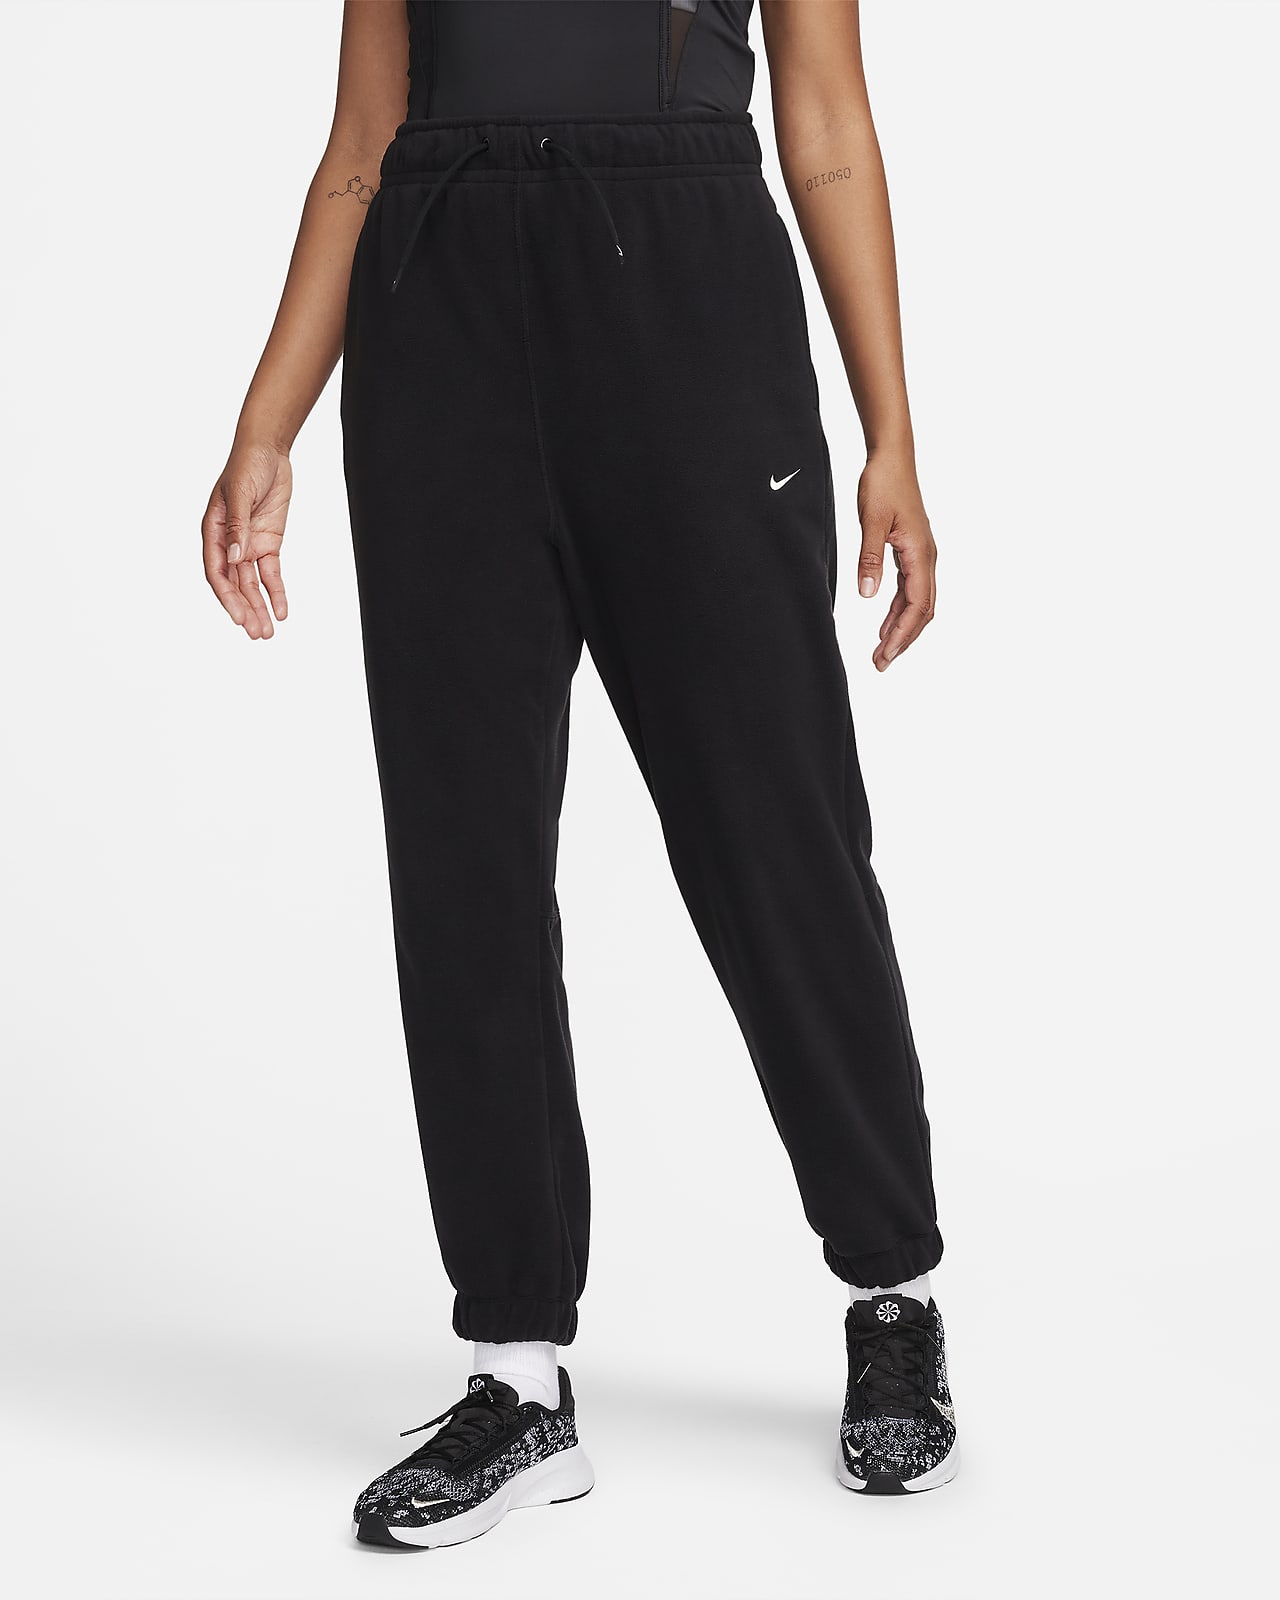 Women's Loose Trousers & Tights. Nike IN